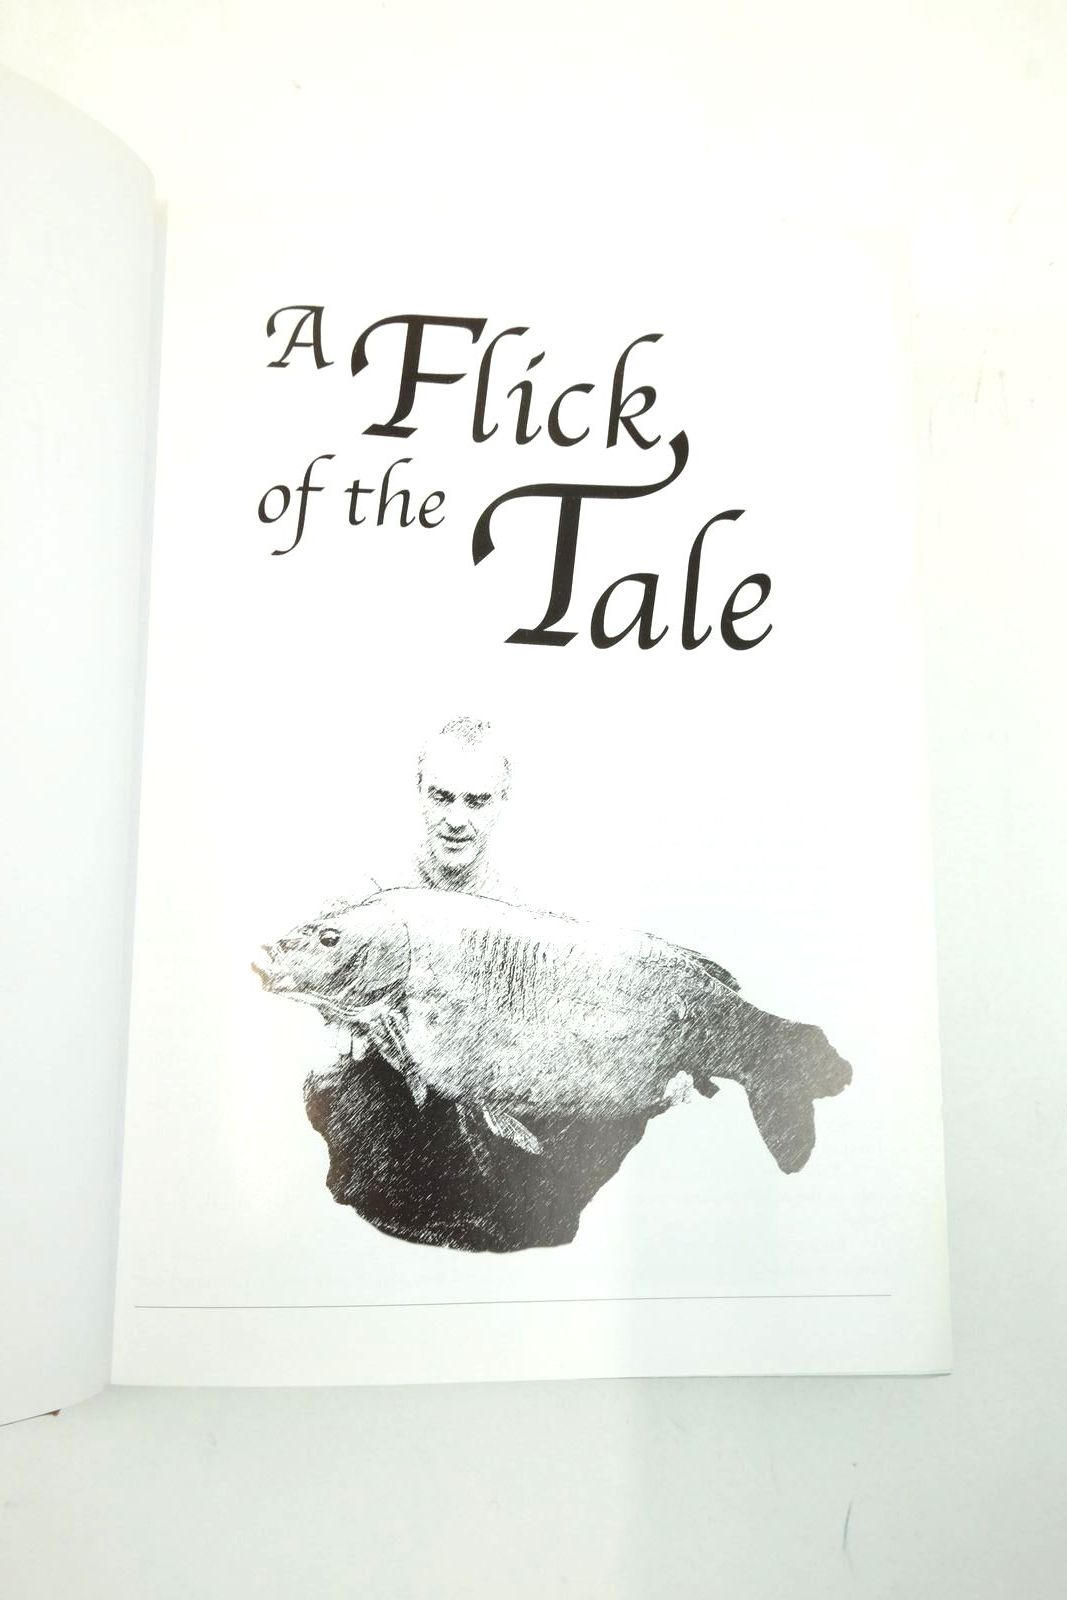 Photo of A FLICK OF THE TALE written by Lane, Dave published by M Press (media) Ltd. (STOCK CODE: 2137745)  for sale by Stella & Rose's Books